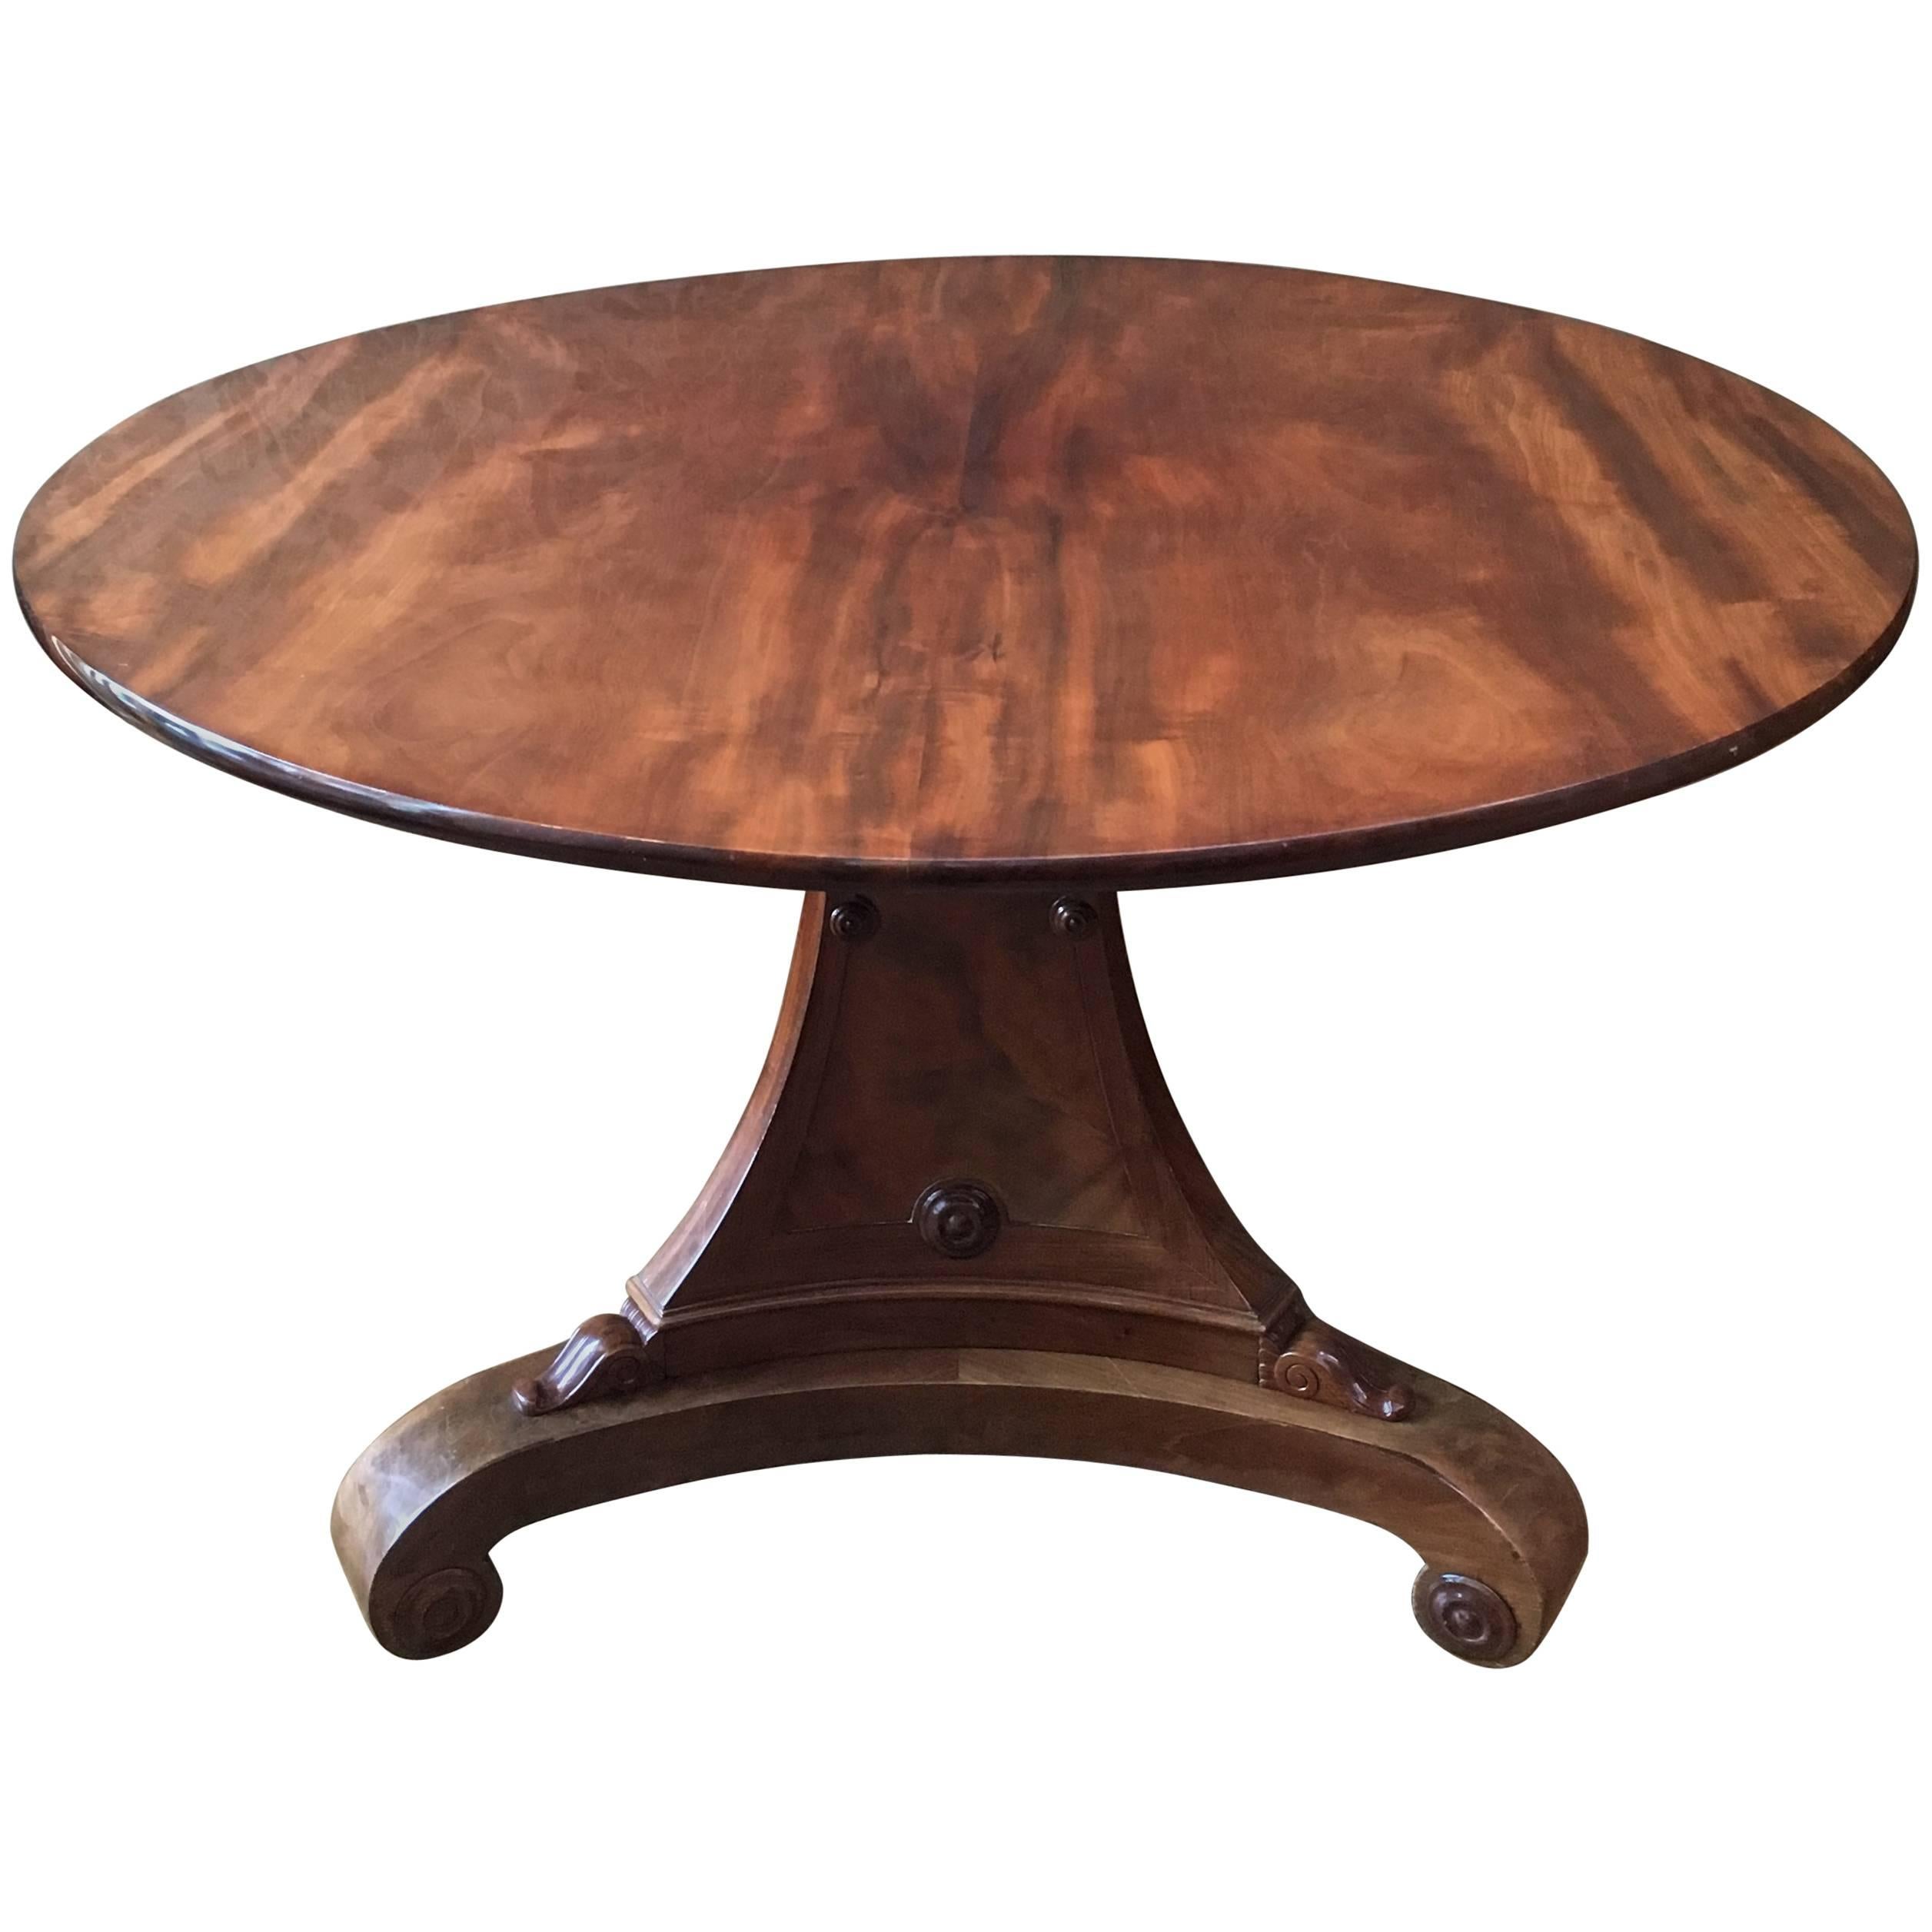 Dutch Empire Table For Sale